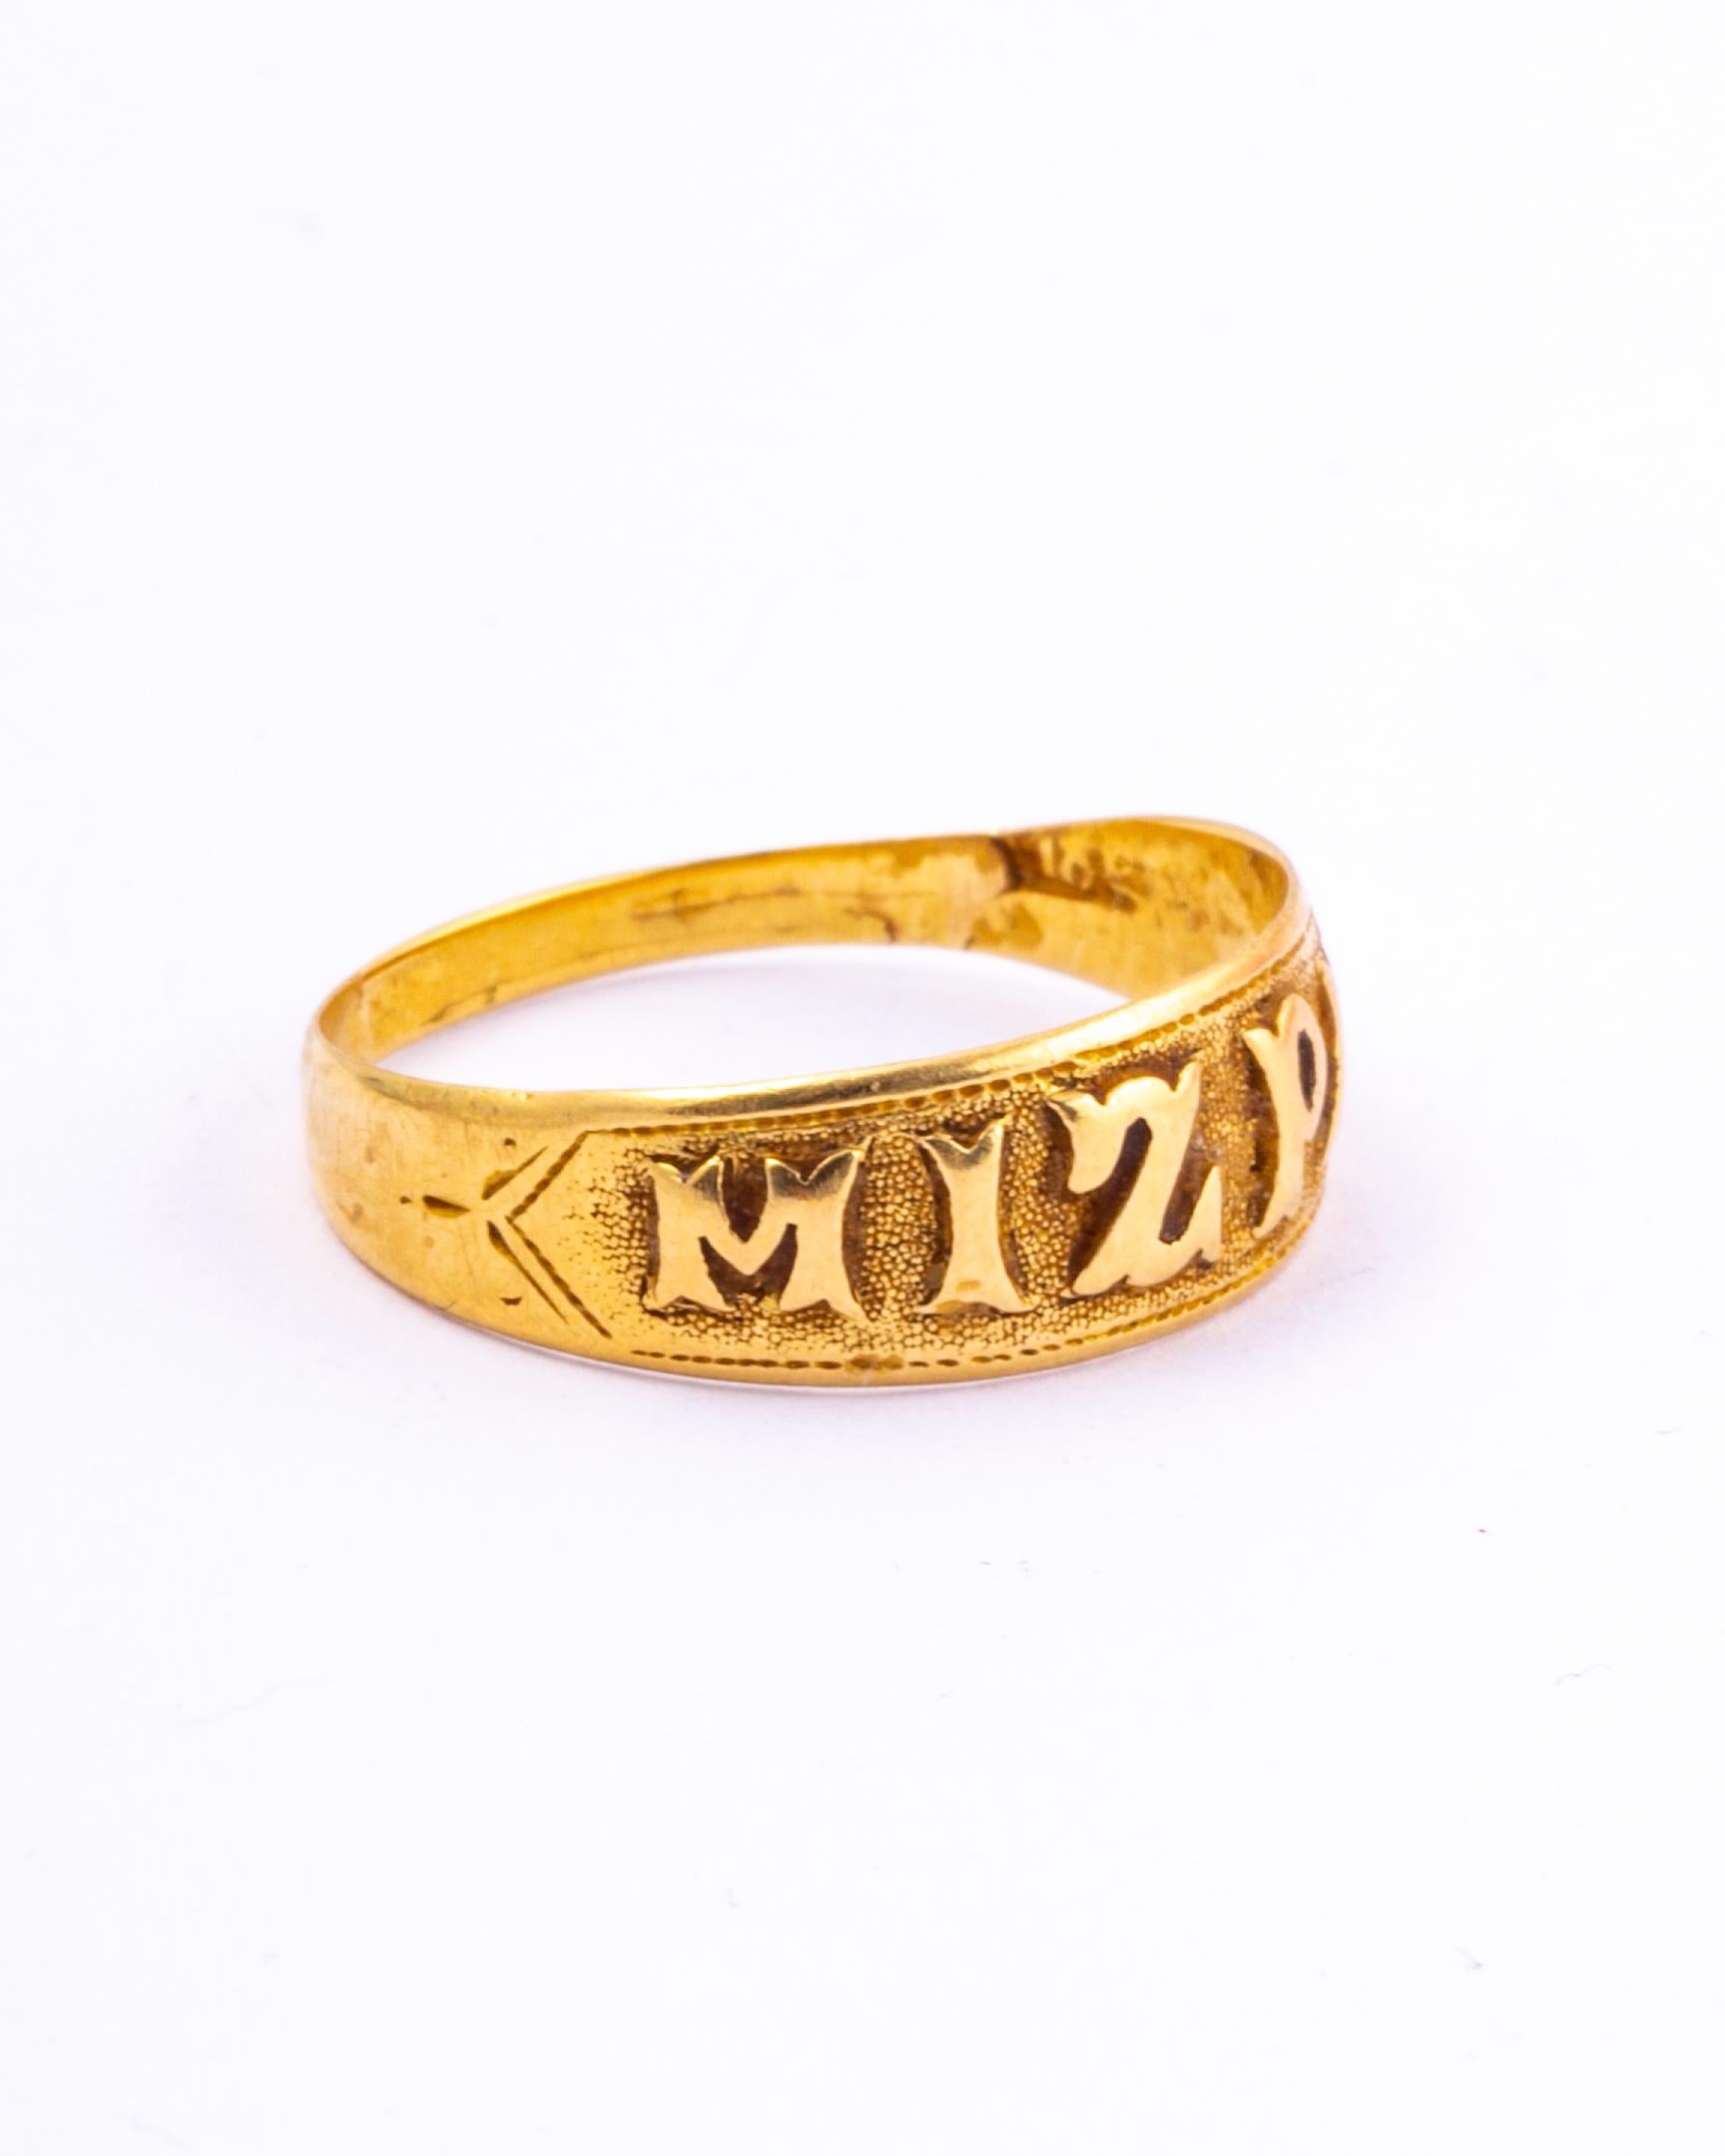 This wonderful antique ring dates from the late Victorian period. It is embossed with the word 